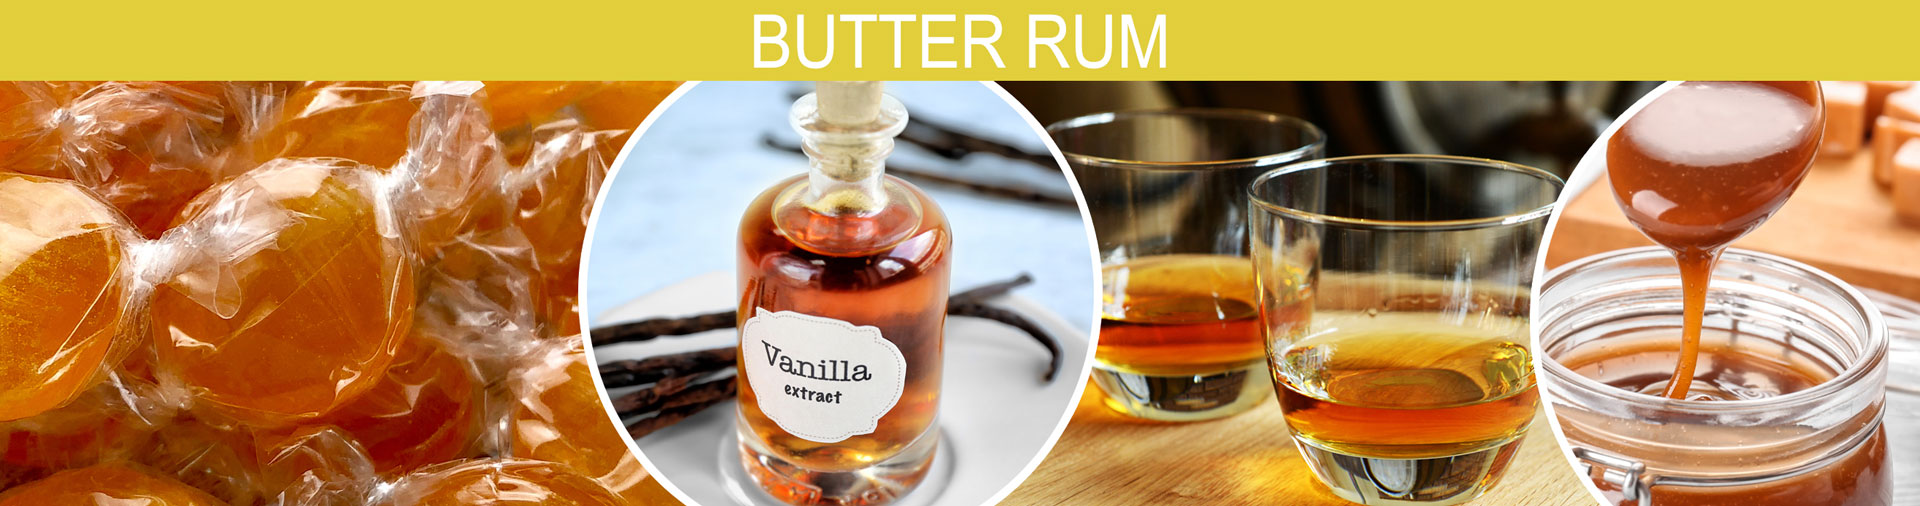 Banner image of vanilla-laced cream combine with buttered rum and hints of soft spice.